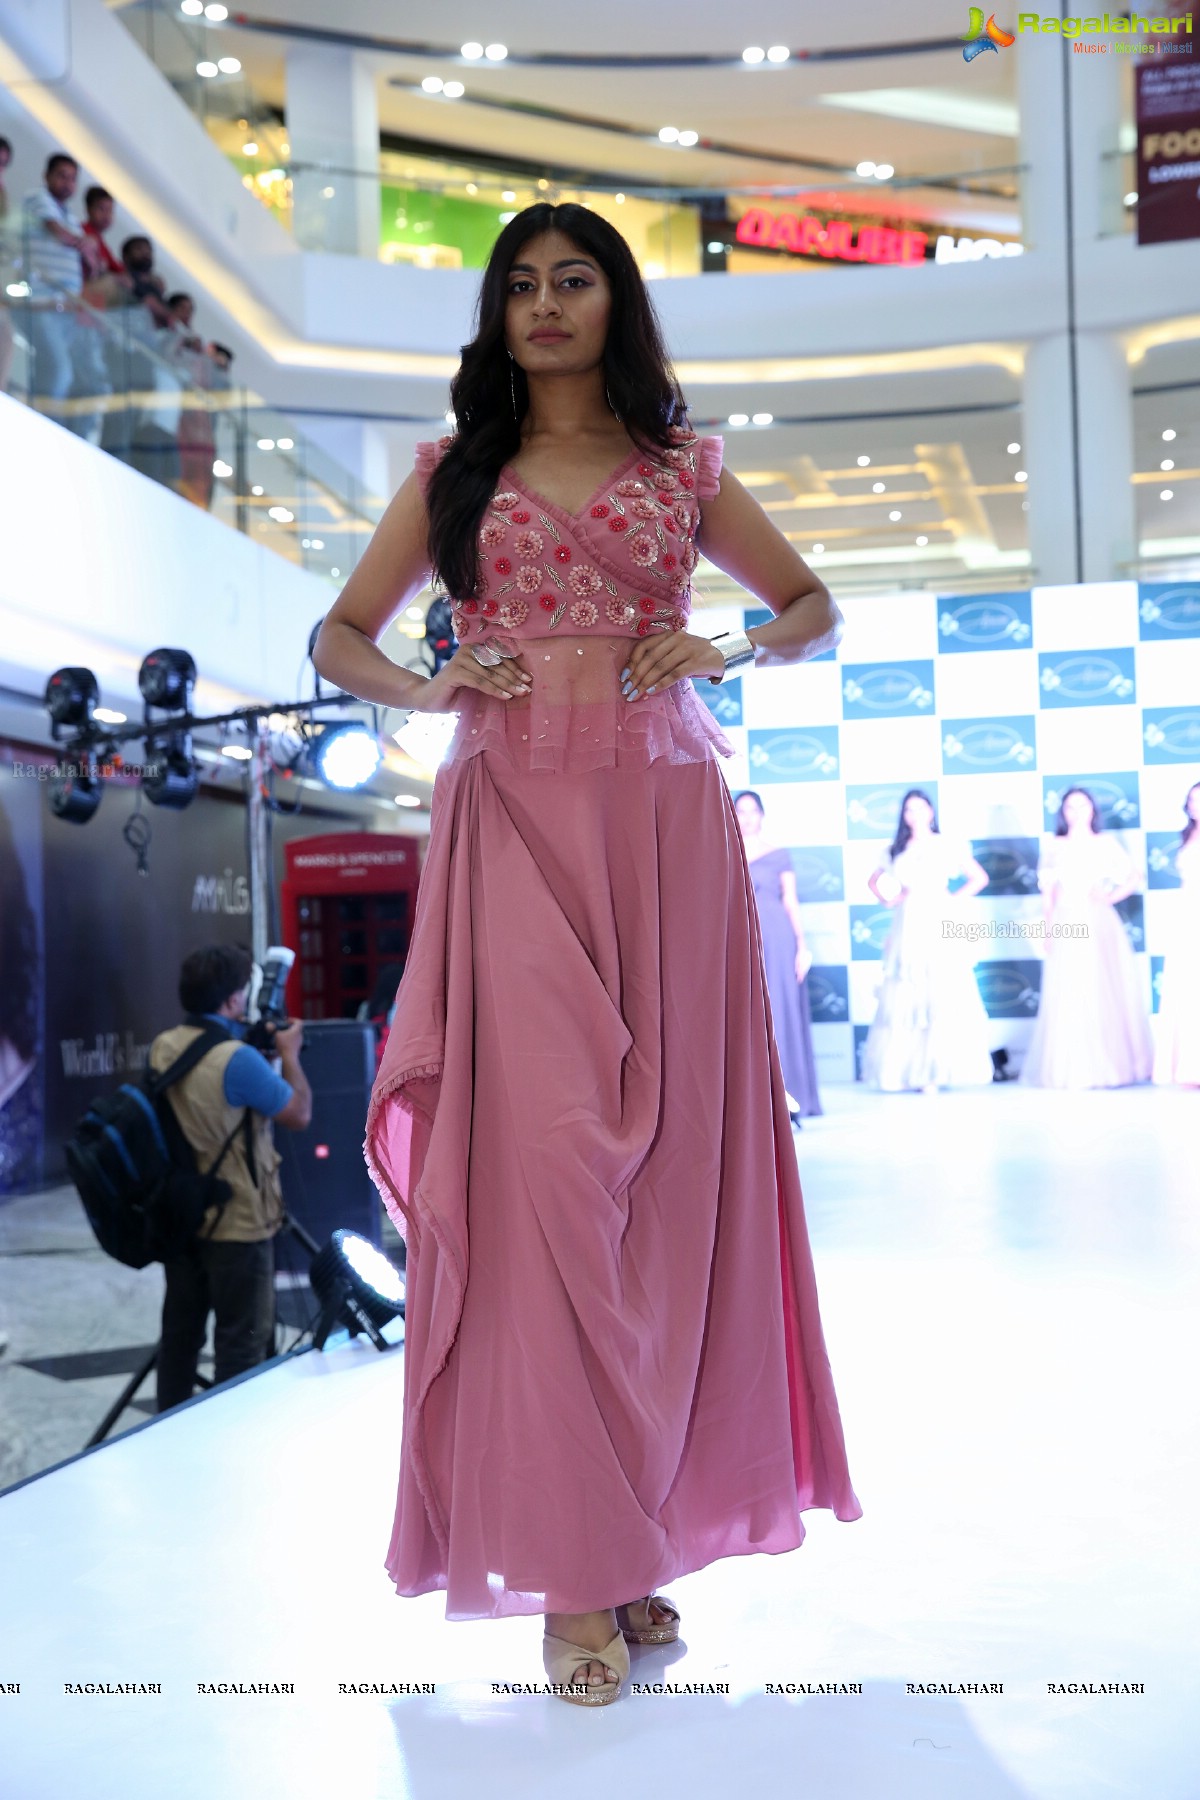 Atelier Showroom Launch With a Fashion Show at Sarath City Mall